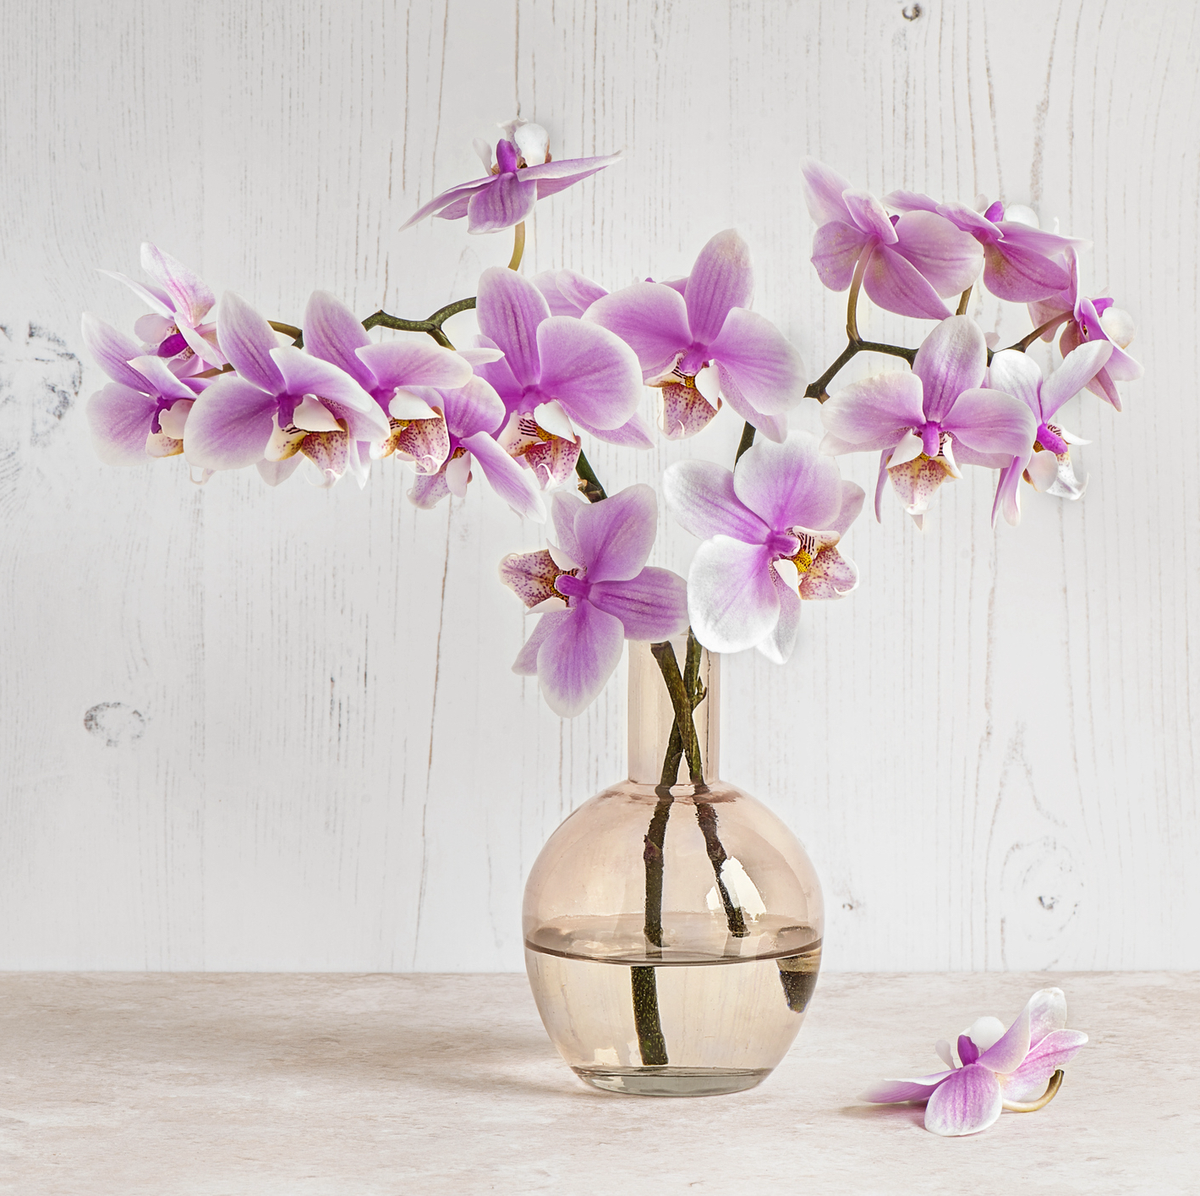 How to Care for Orchids - Tips for Growing Orchids